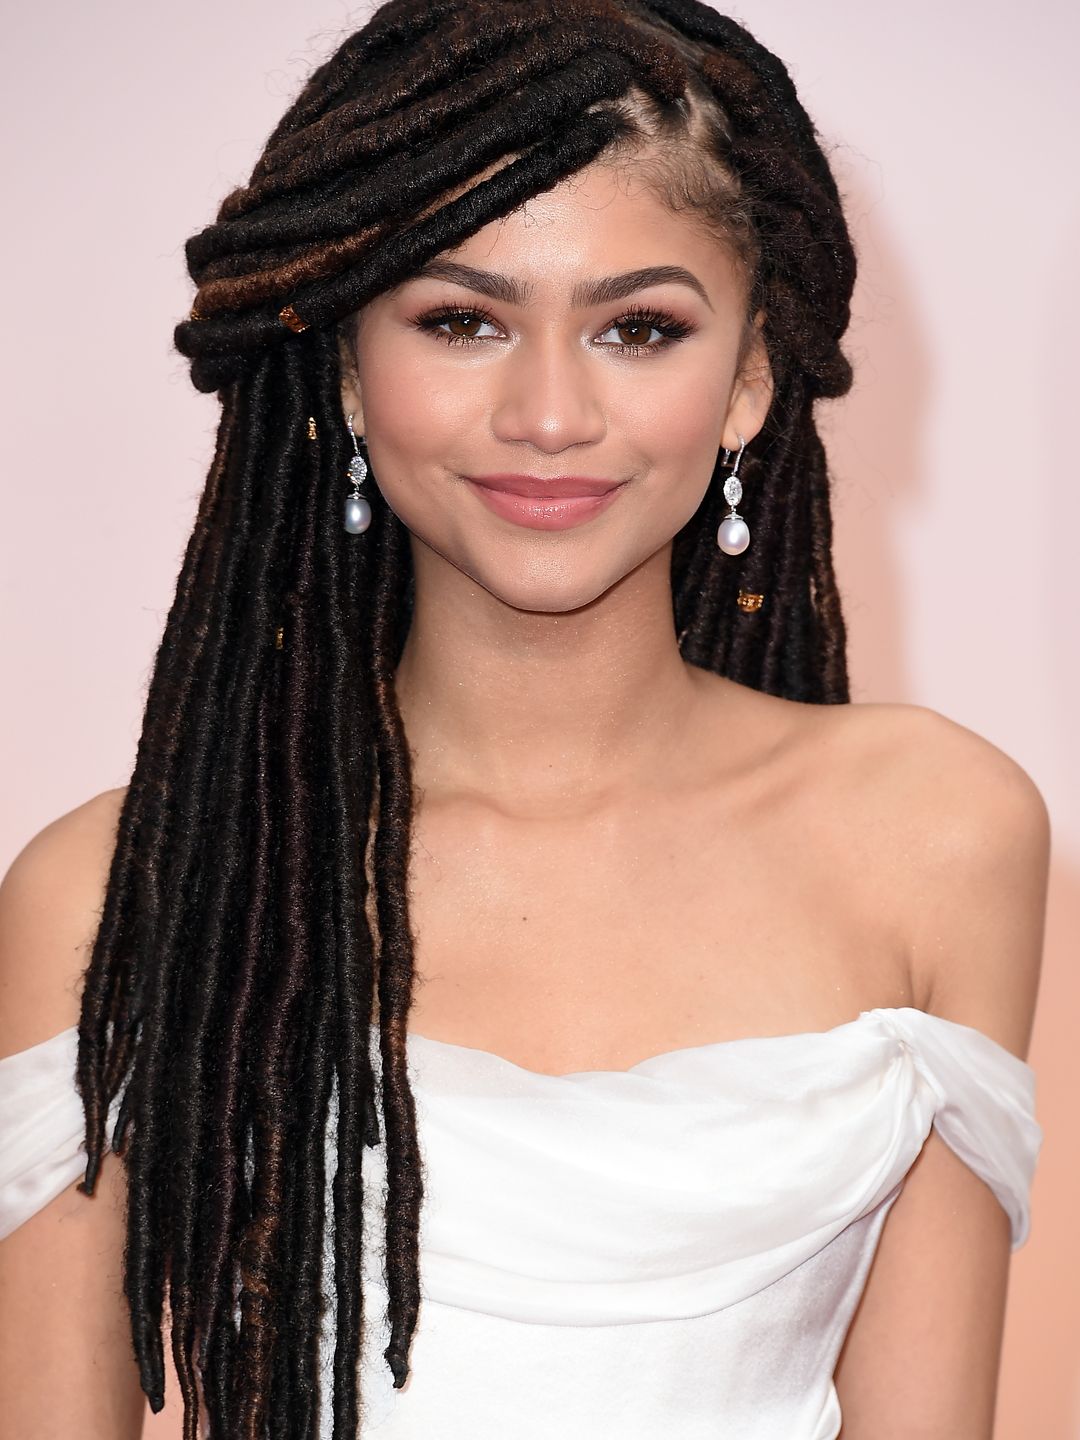 Actress Zendaya attends the 87th Annual Academy Awards at Hollywood & Highland Center on February 22, 2015 in Hollywood, California.  (Photo by Steve Granitz/WireImage)